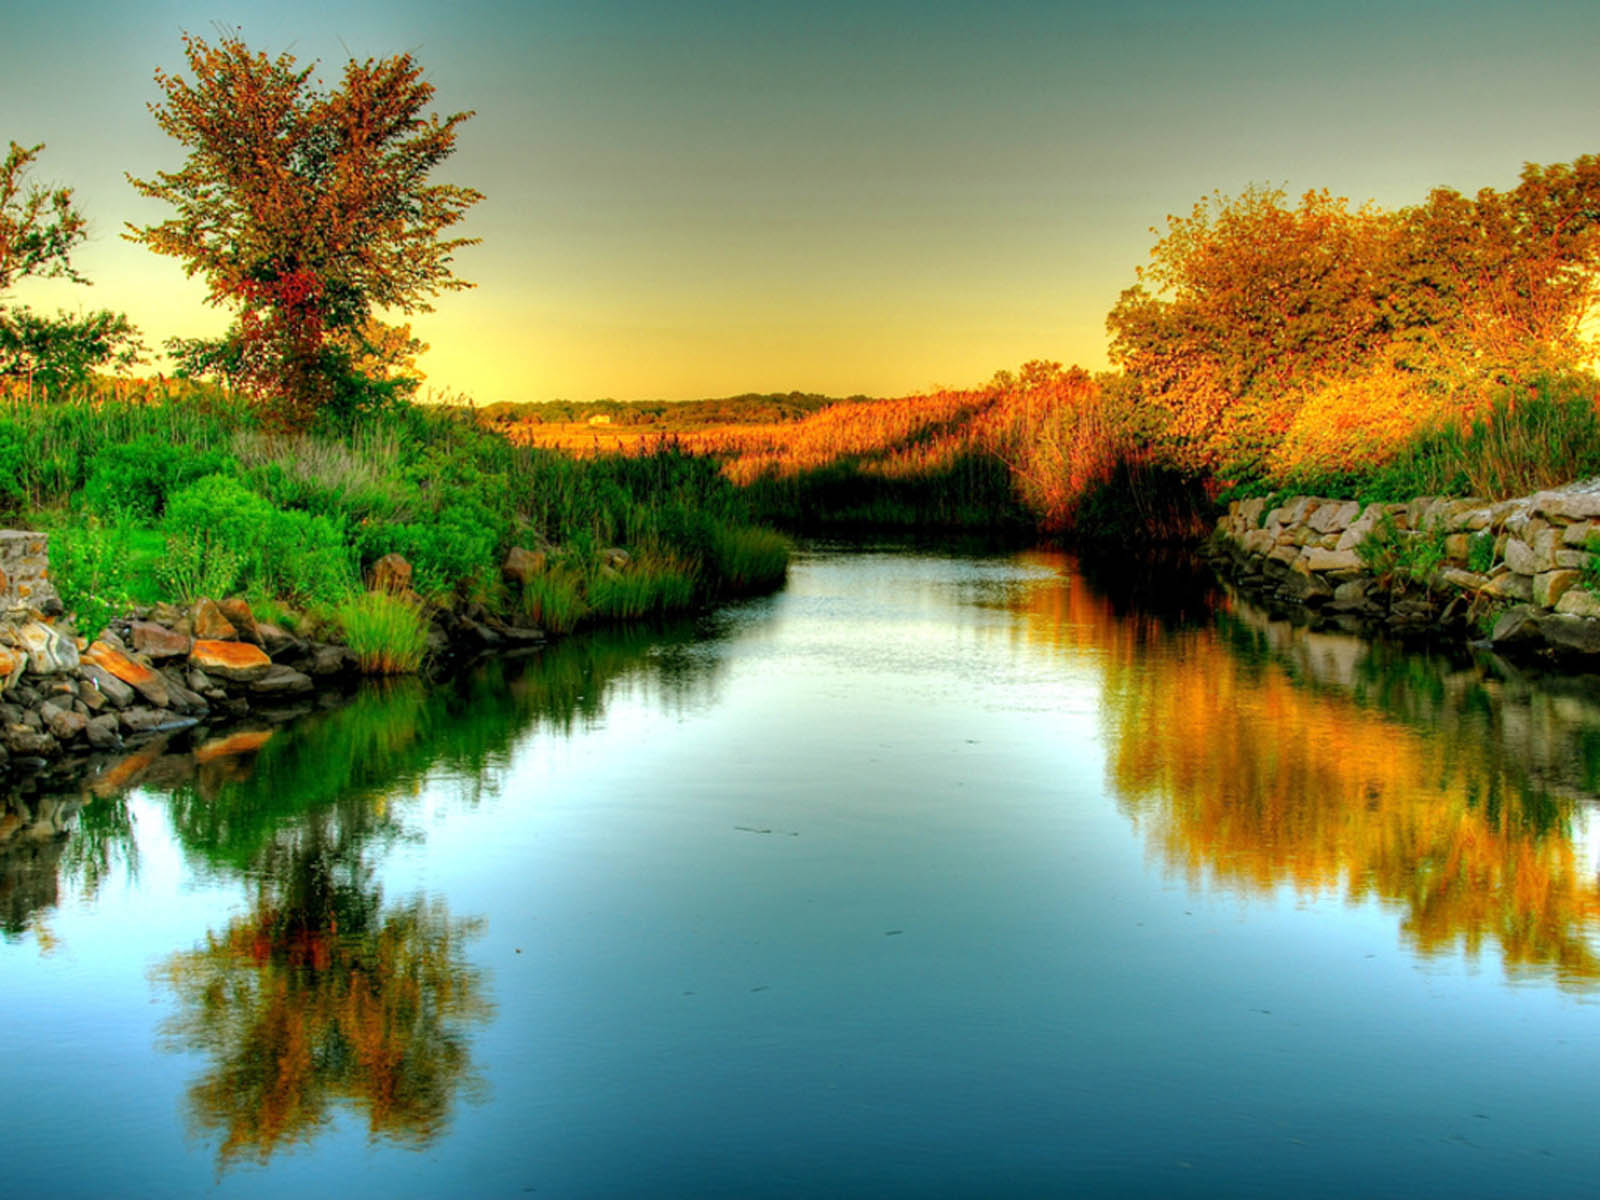 Tag River Wallpaper Image Photos Pictures And Background For